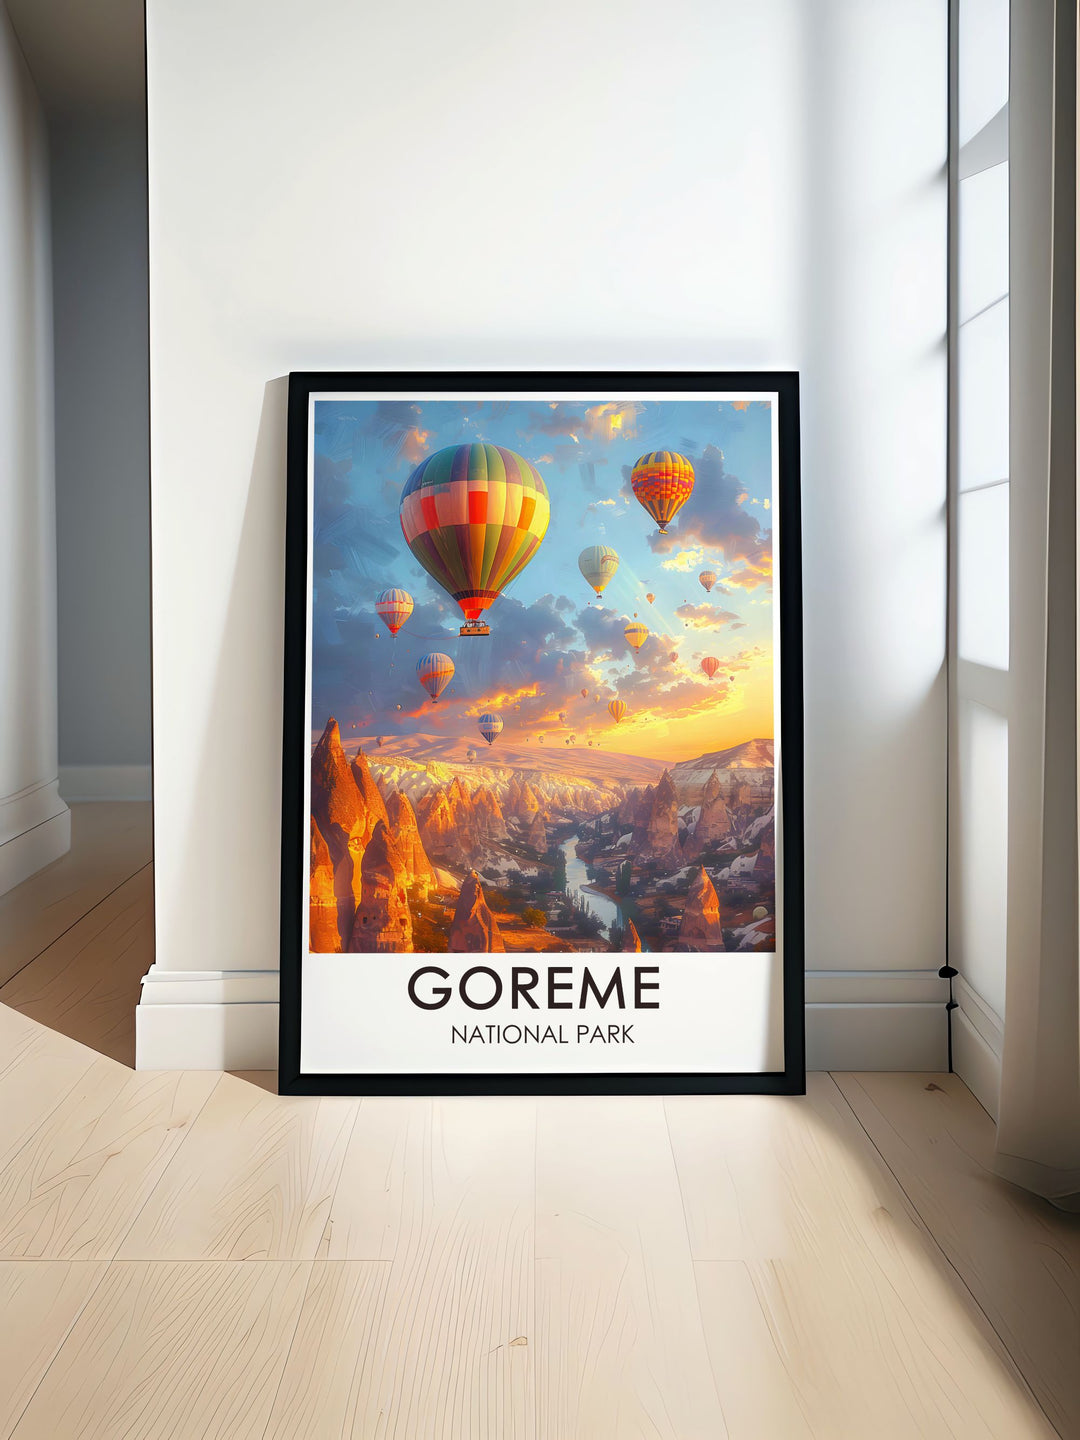 Featuring the magical scenery of Goreme National Park with its distinctive Fairy Chimneys and hot air balloons, this poster brings the enchanting beauty of Cappadocia, Turkey, into your home, perfect for any decor.